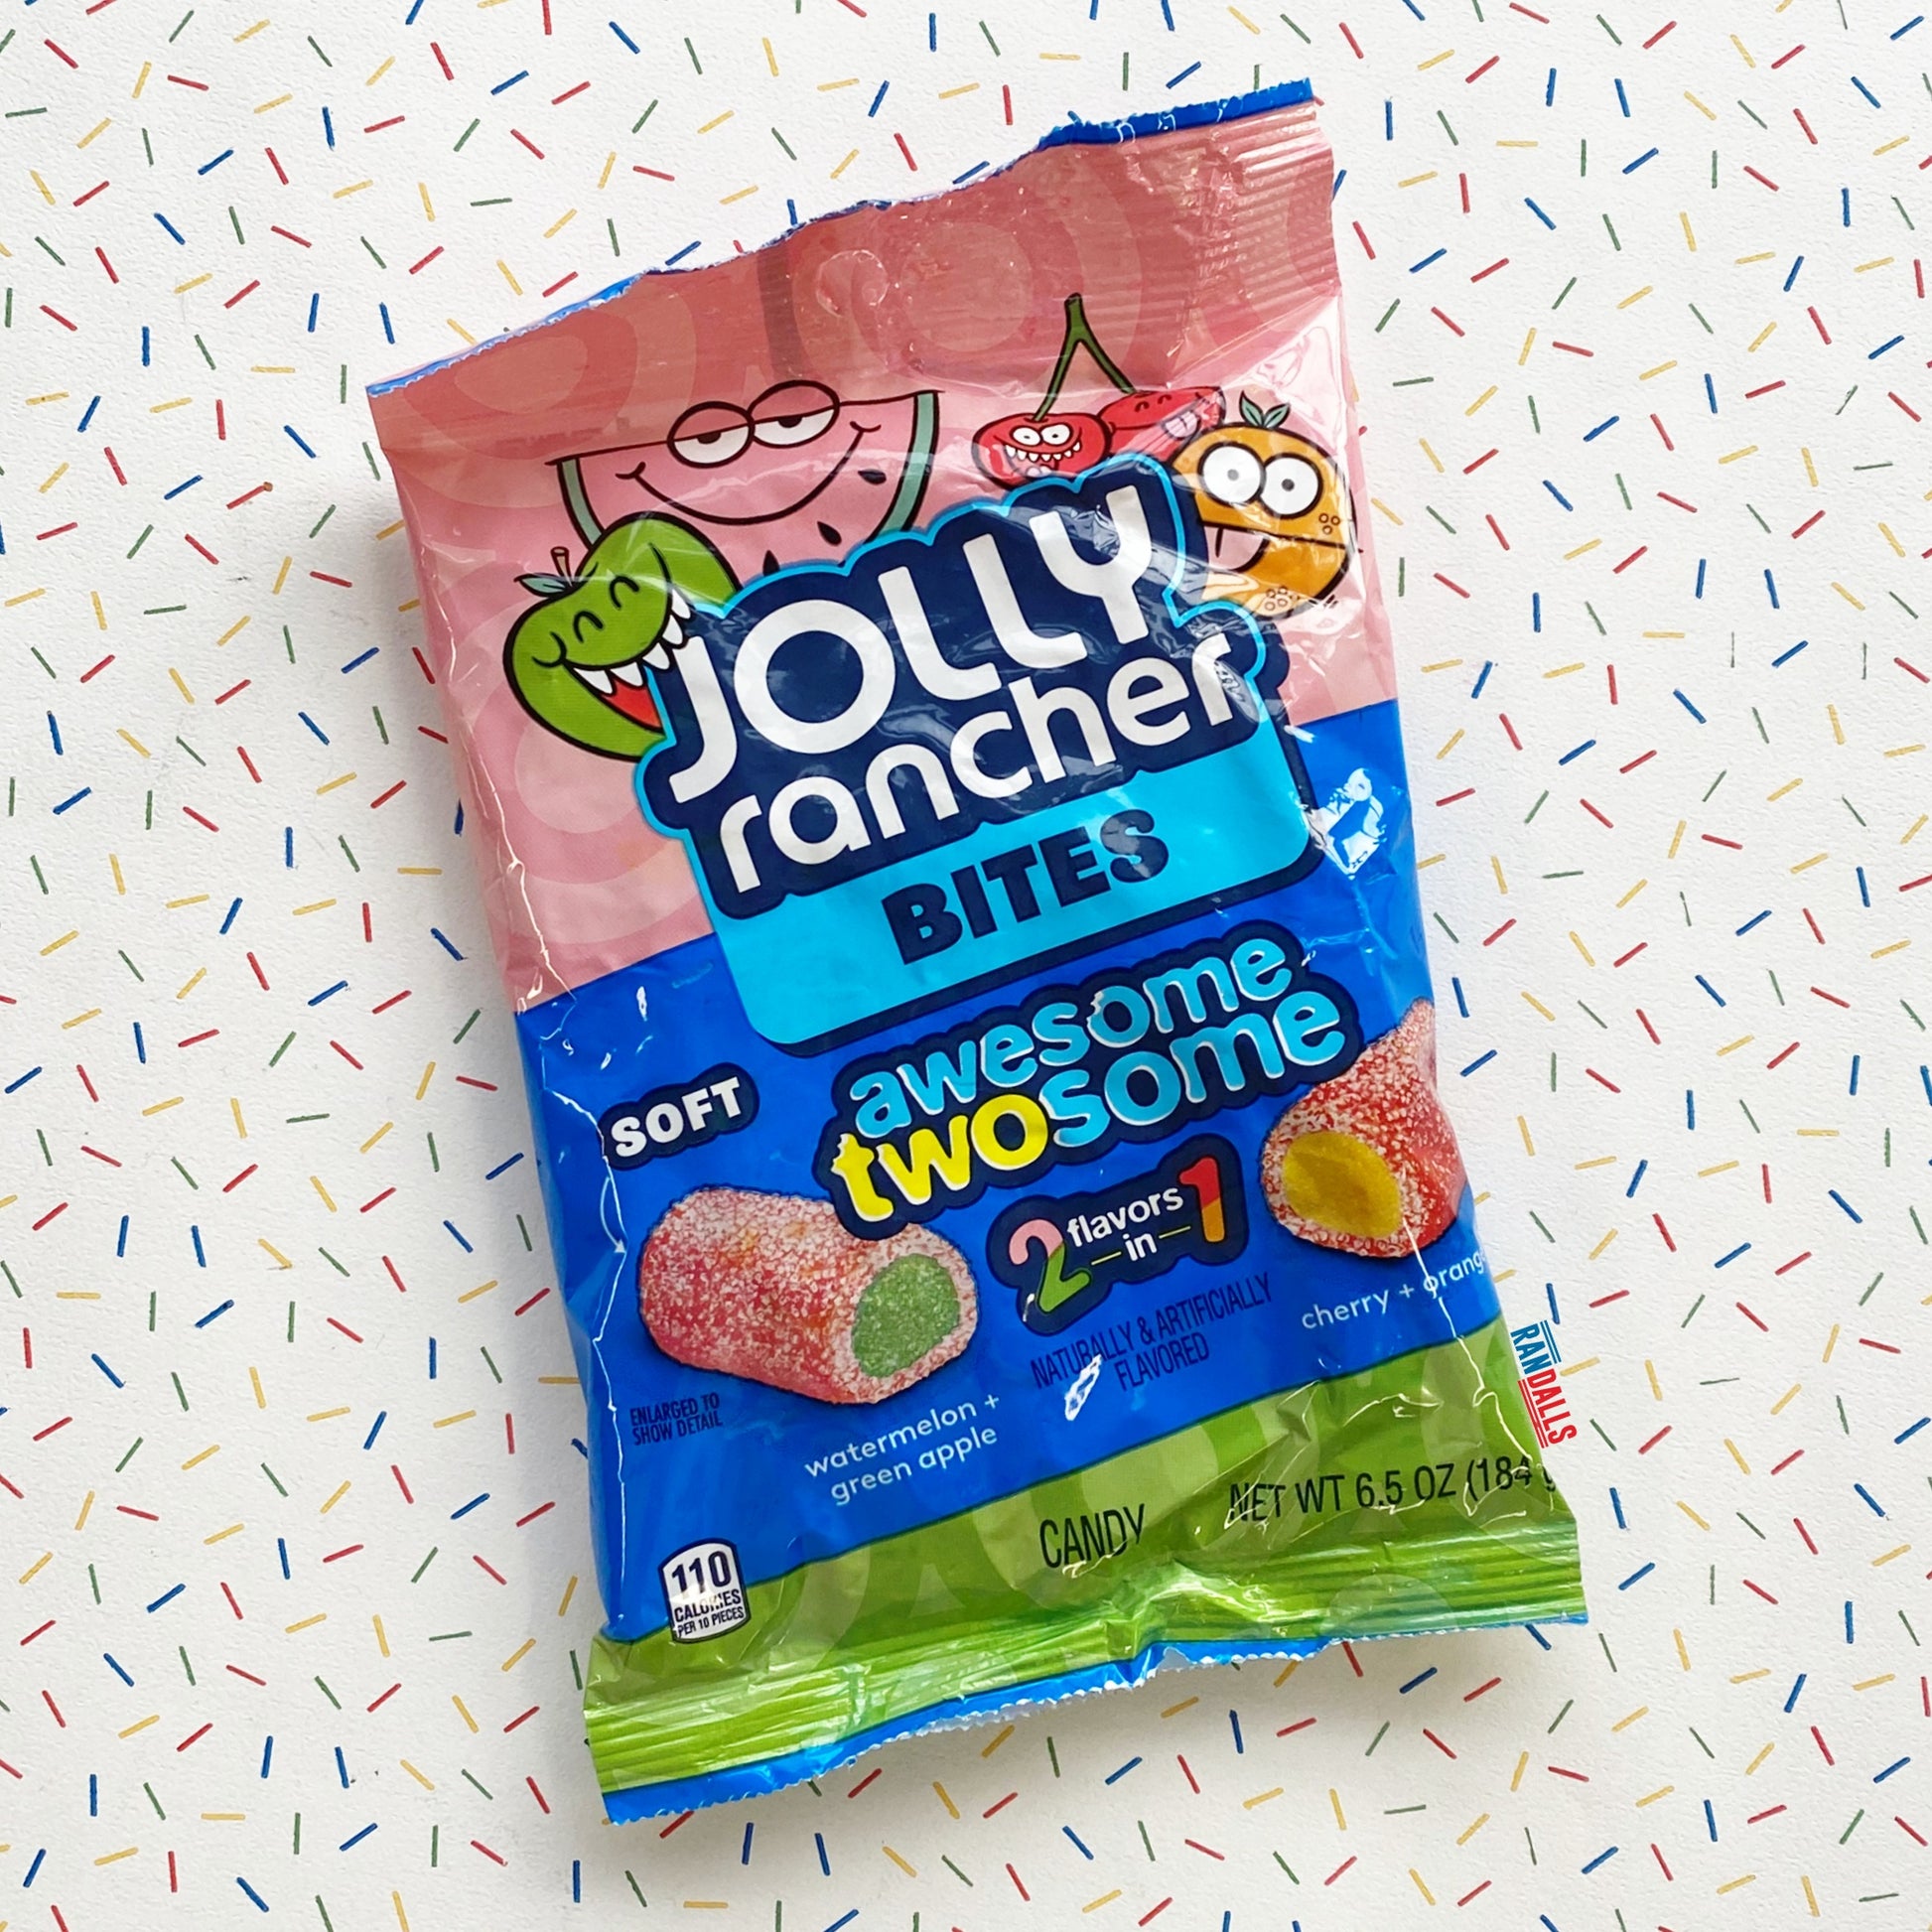 jolly rancher awesome twosome, chewy sweets, candy, watermelon and green apple, cherry and orange,usa, randalls